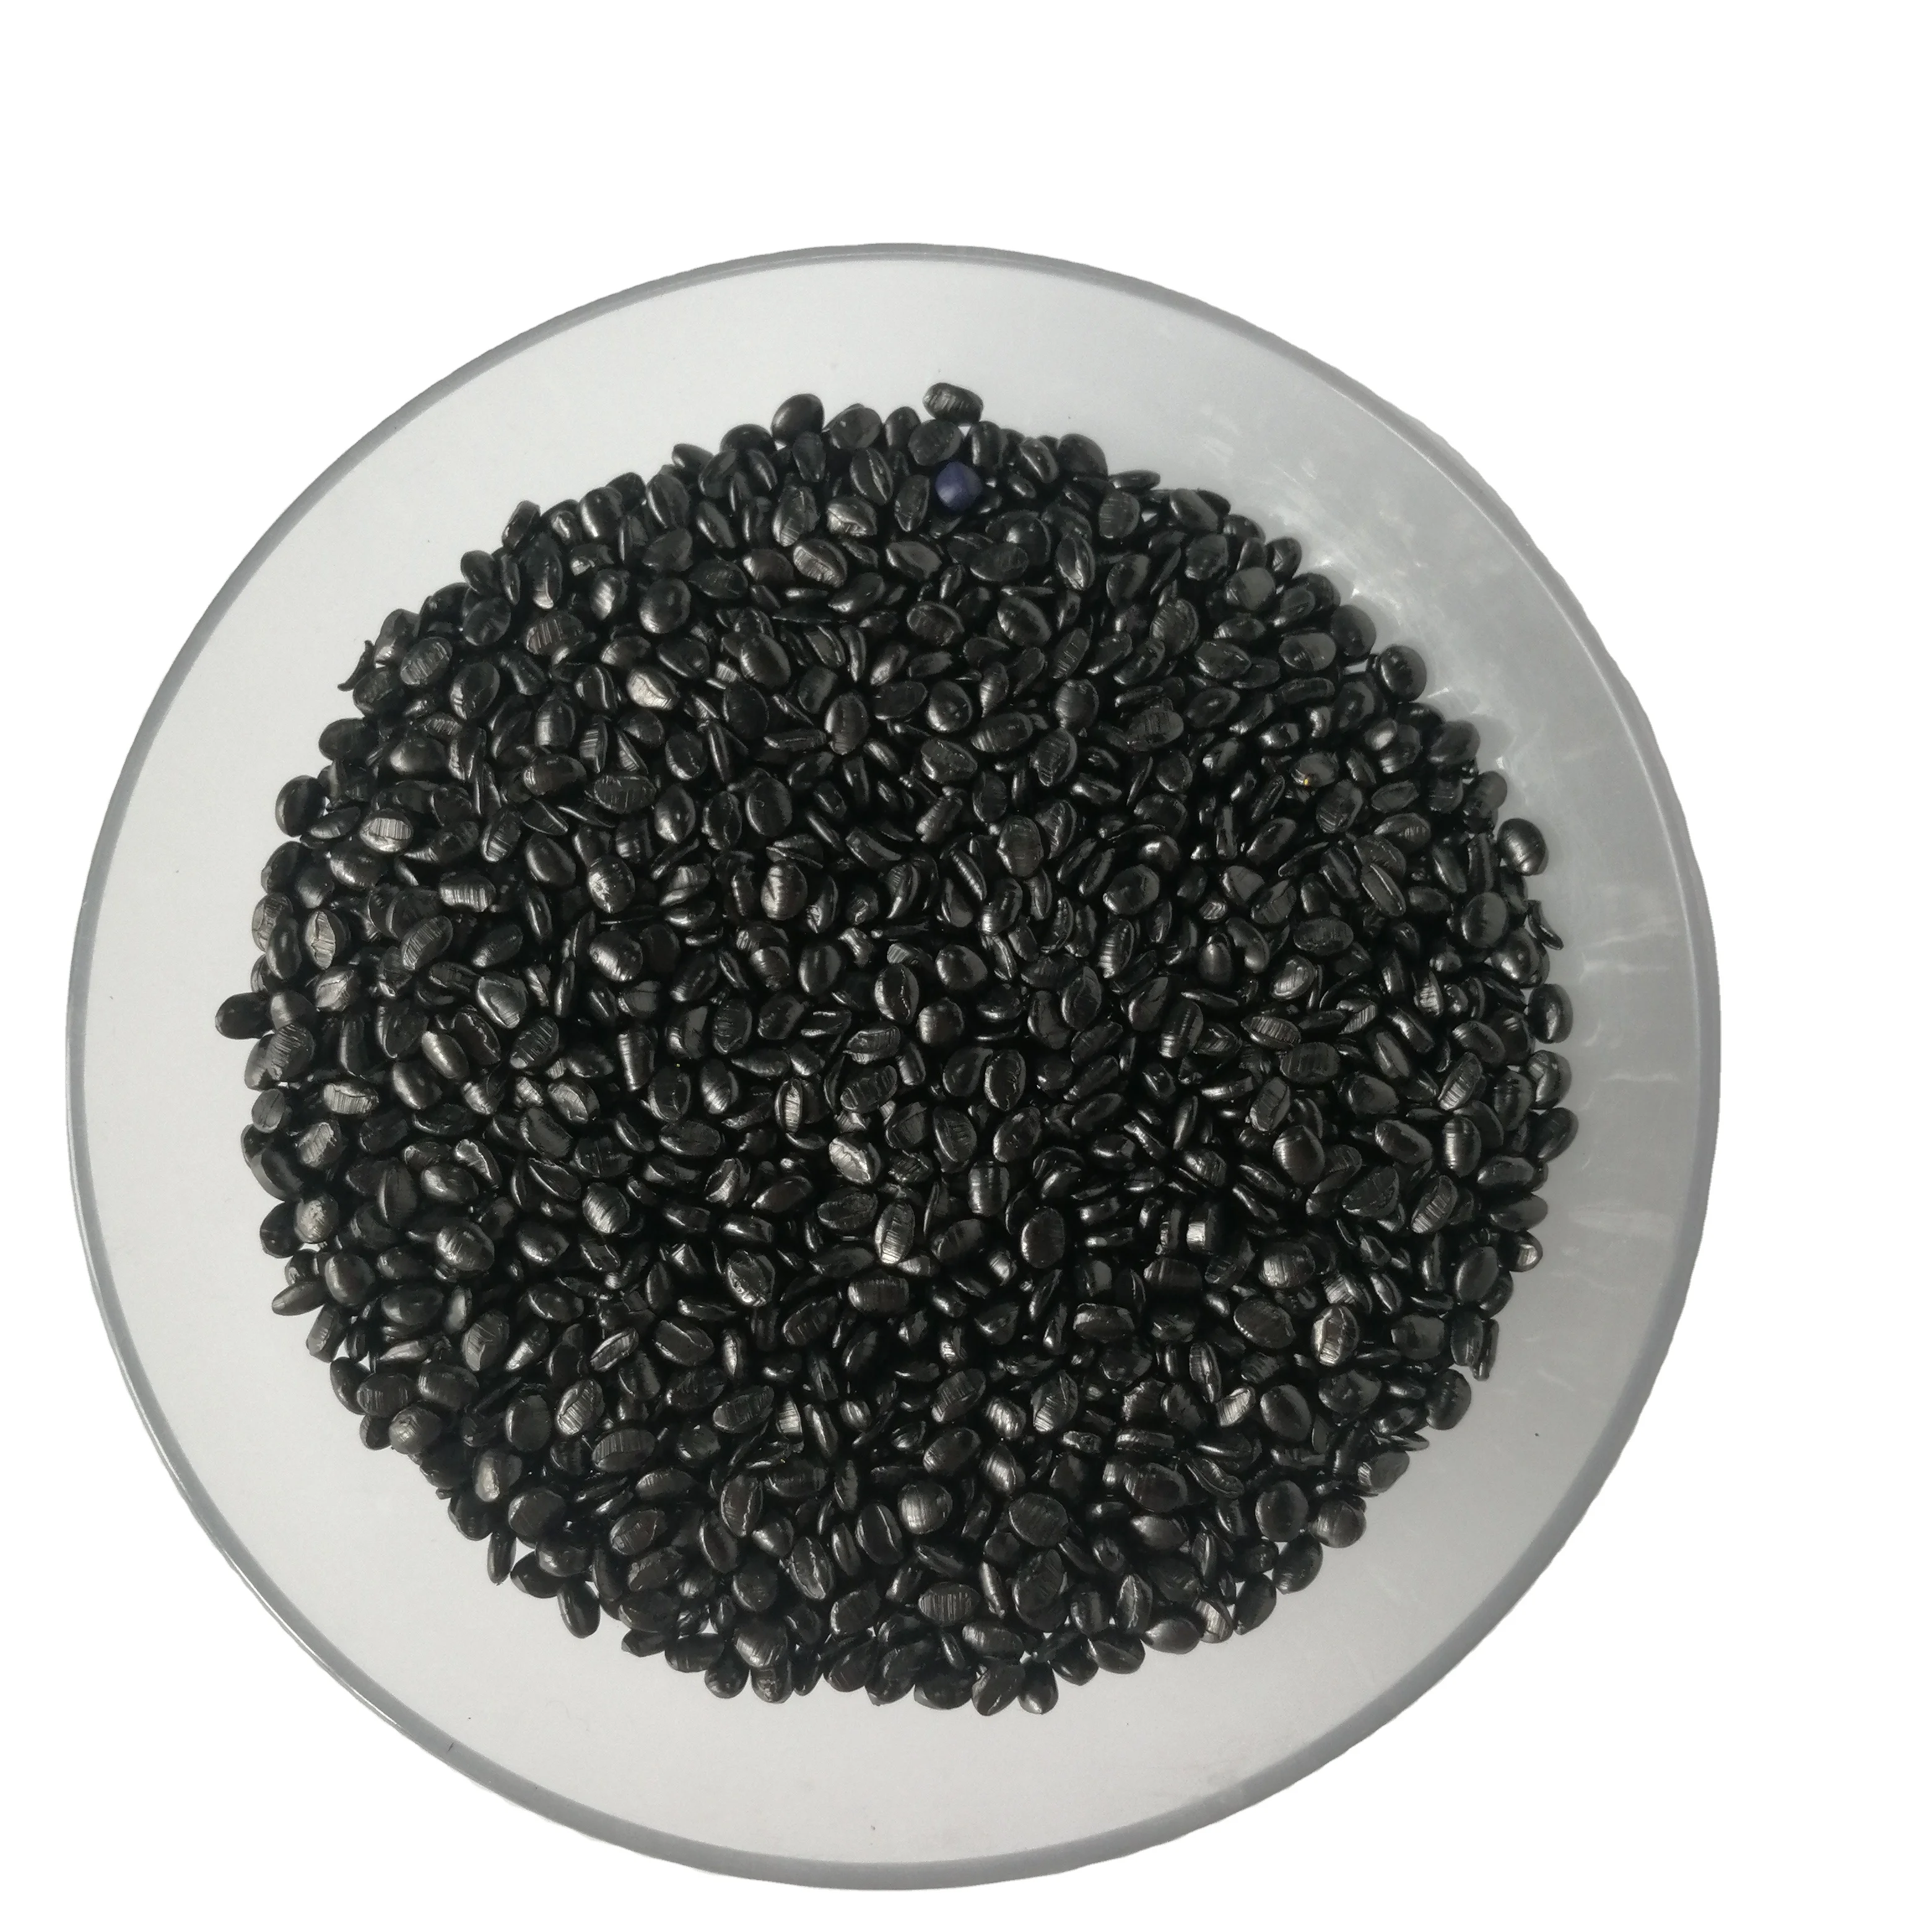 Black plastic masterbatch and color masterbatch manufacturers raw materials recycled plastic granules PE PP PET PLA ABS